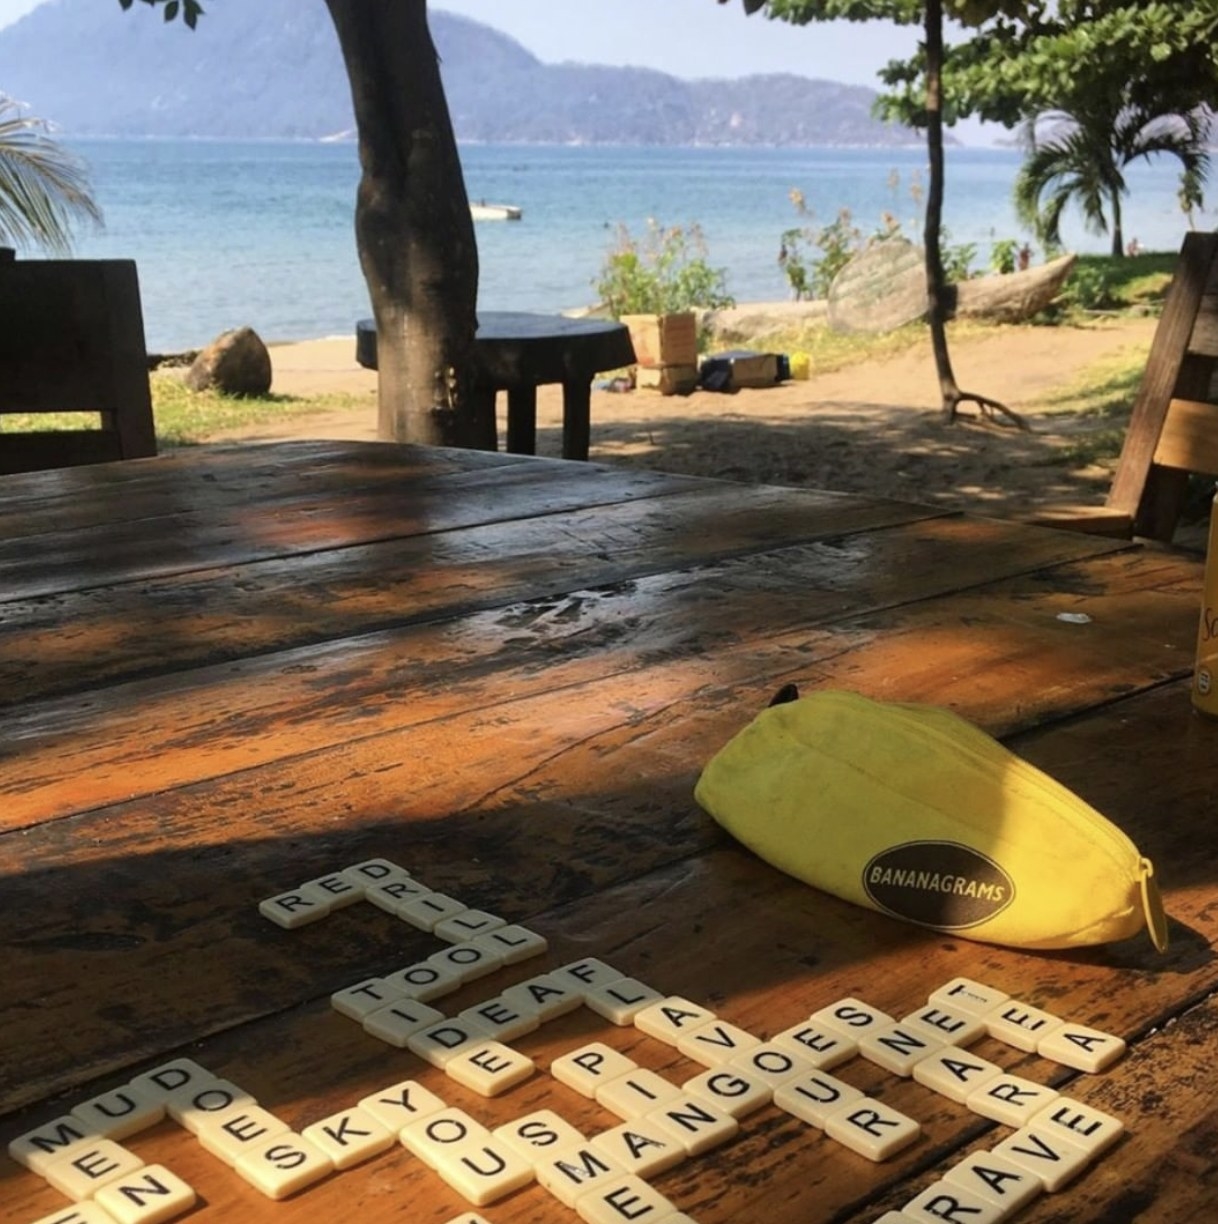 The game being played on outdoor table by water